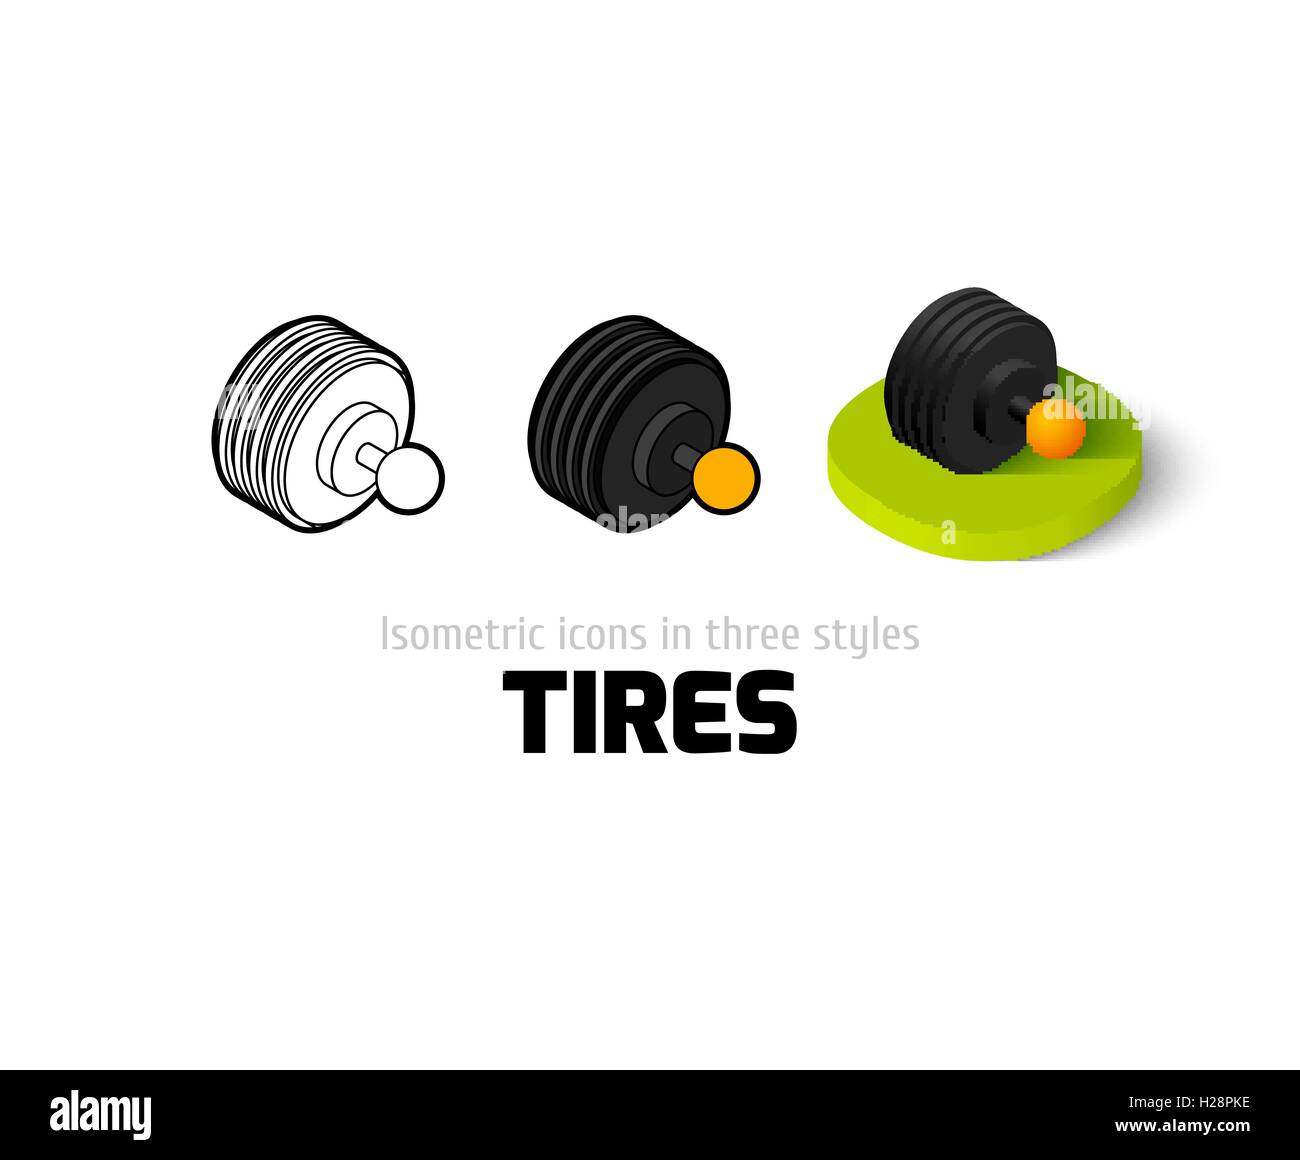 Tires icon in different style Stock Vector